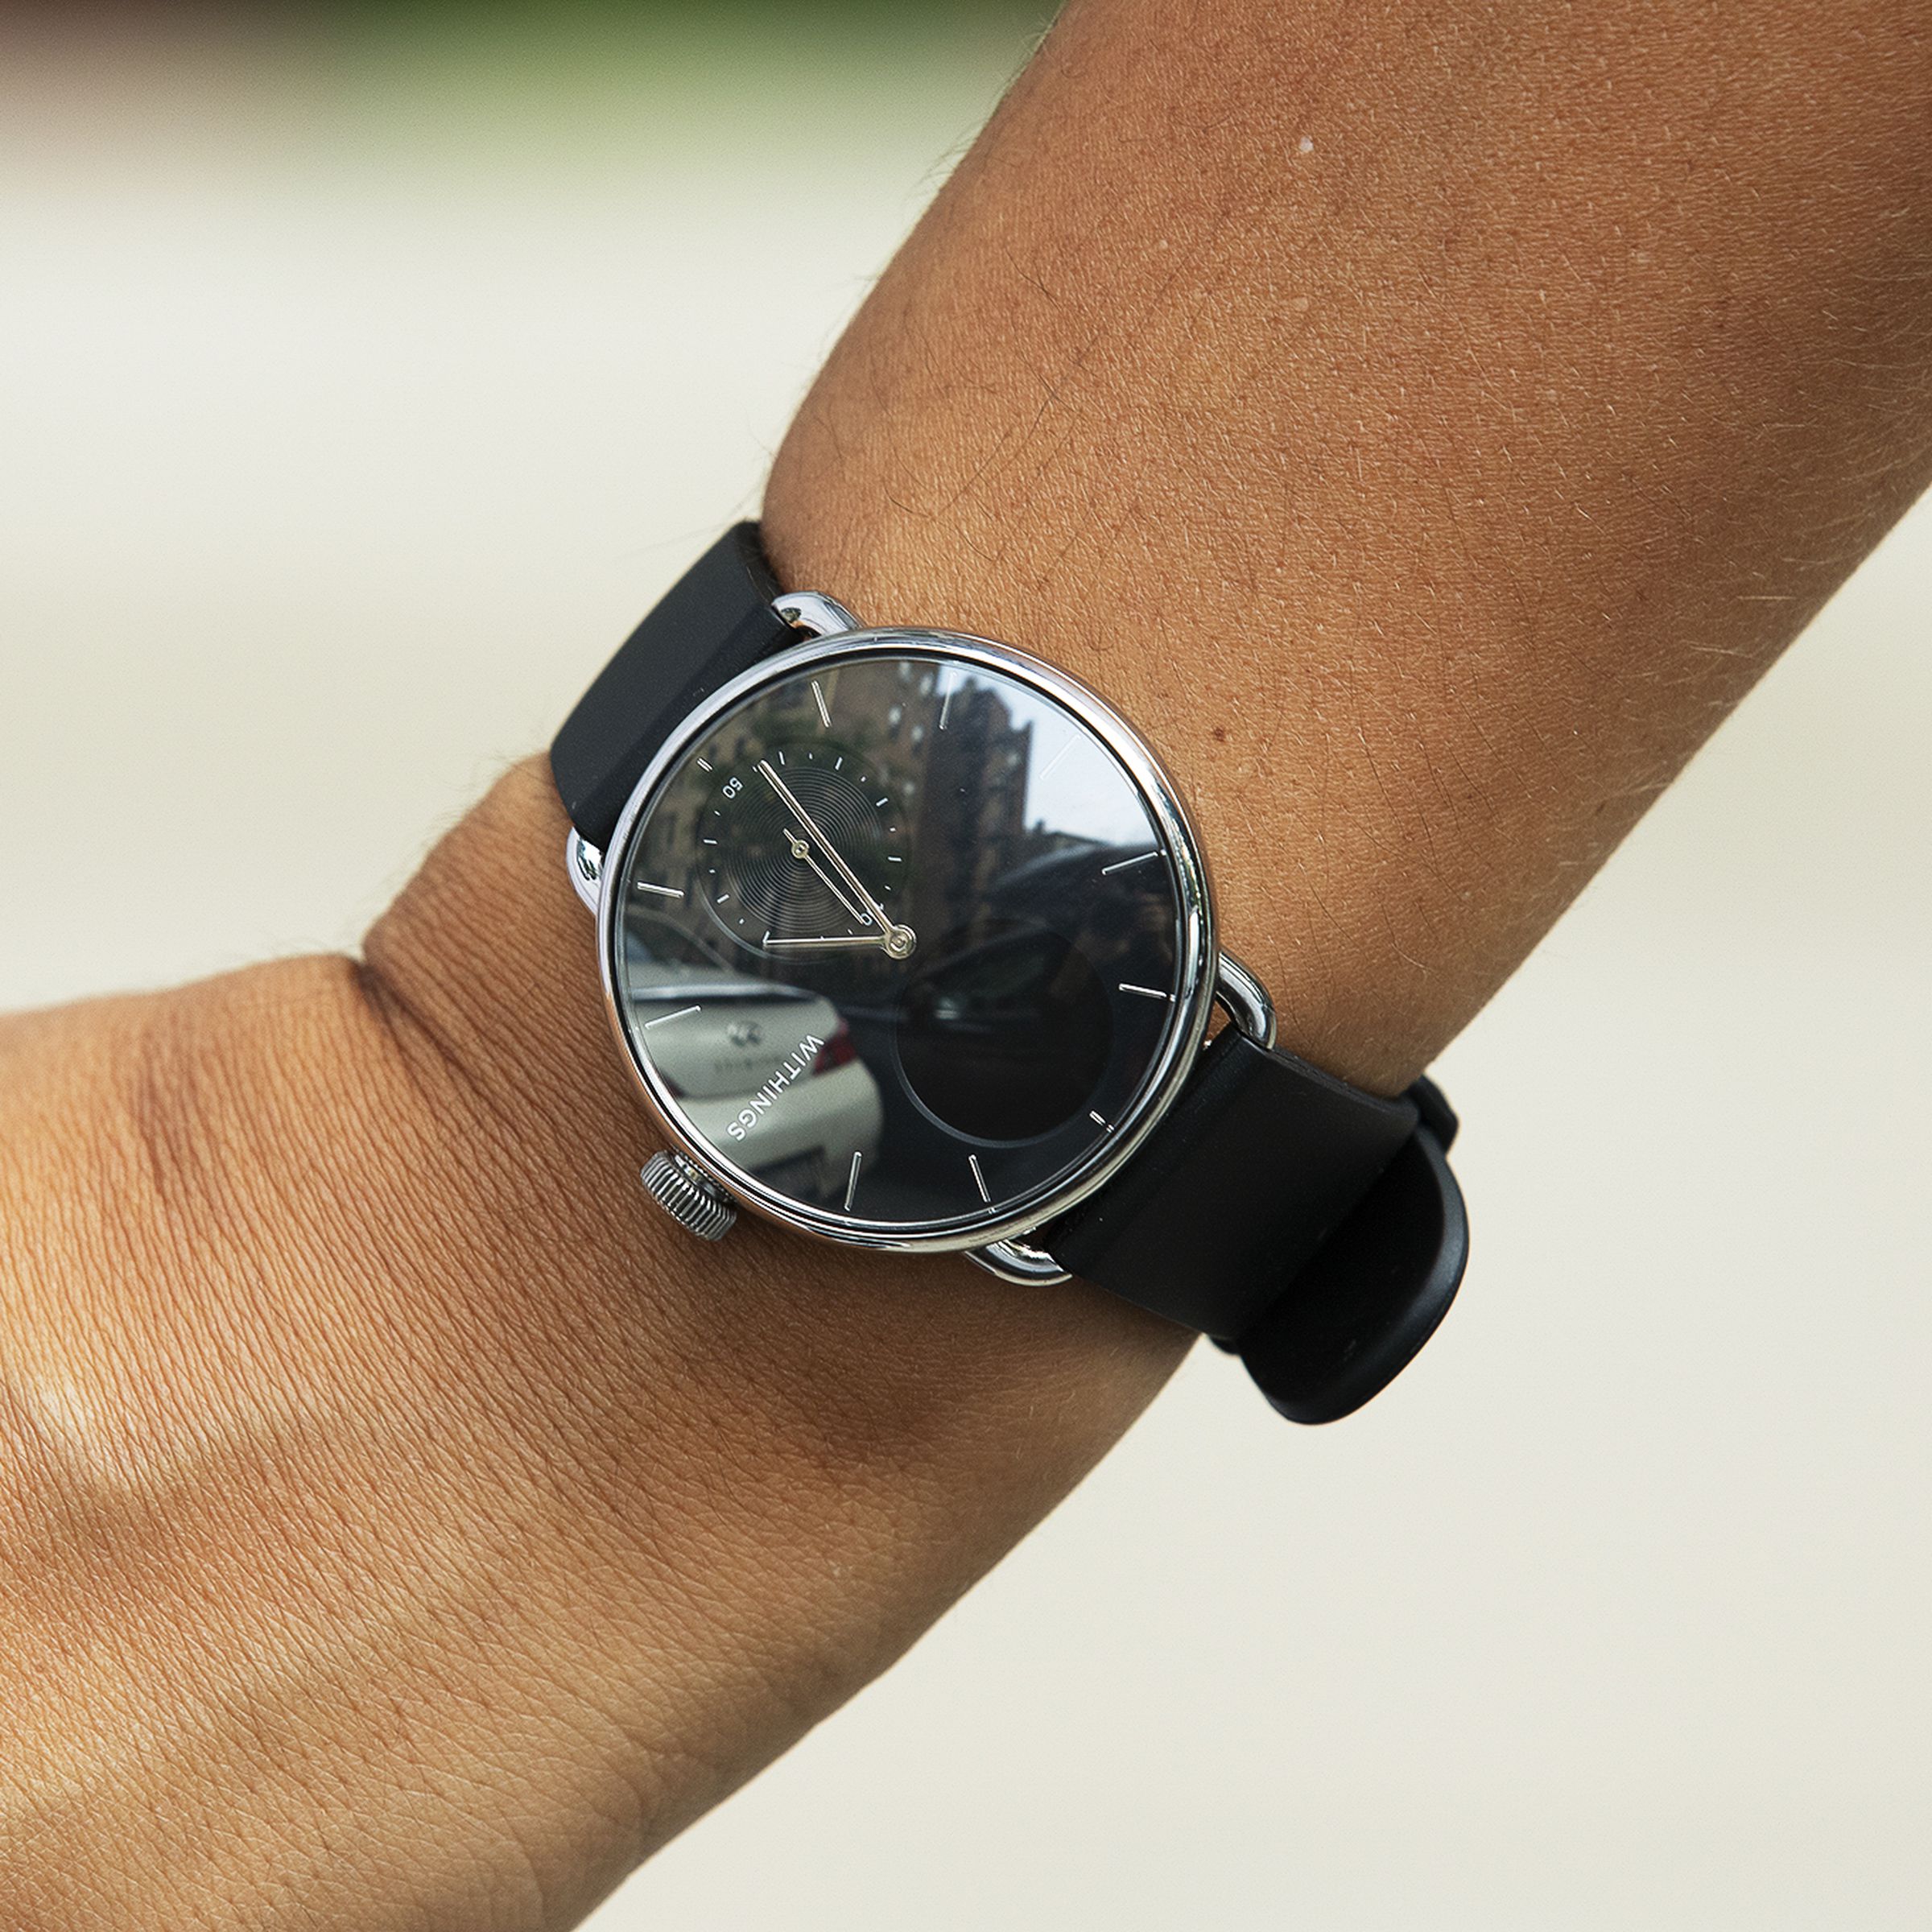 The Withings ScanWatch comes with new health features.